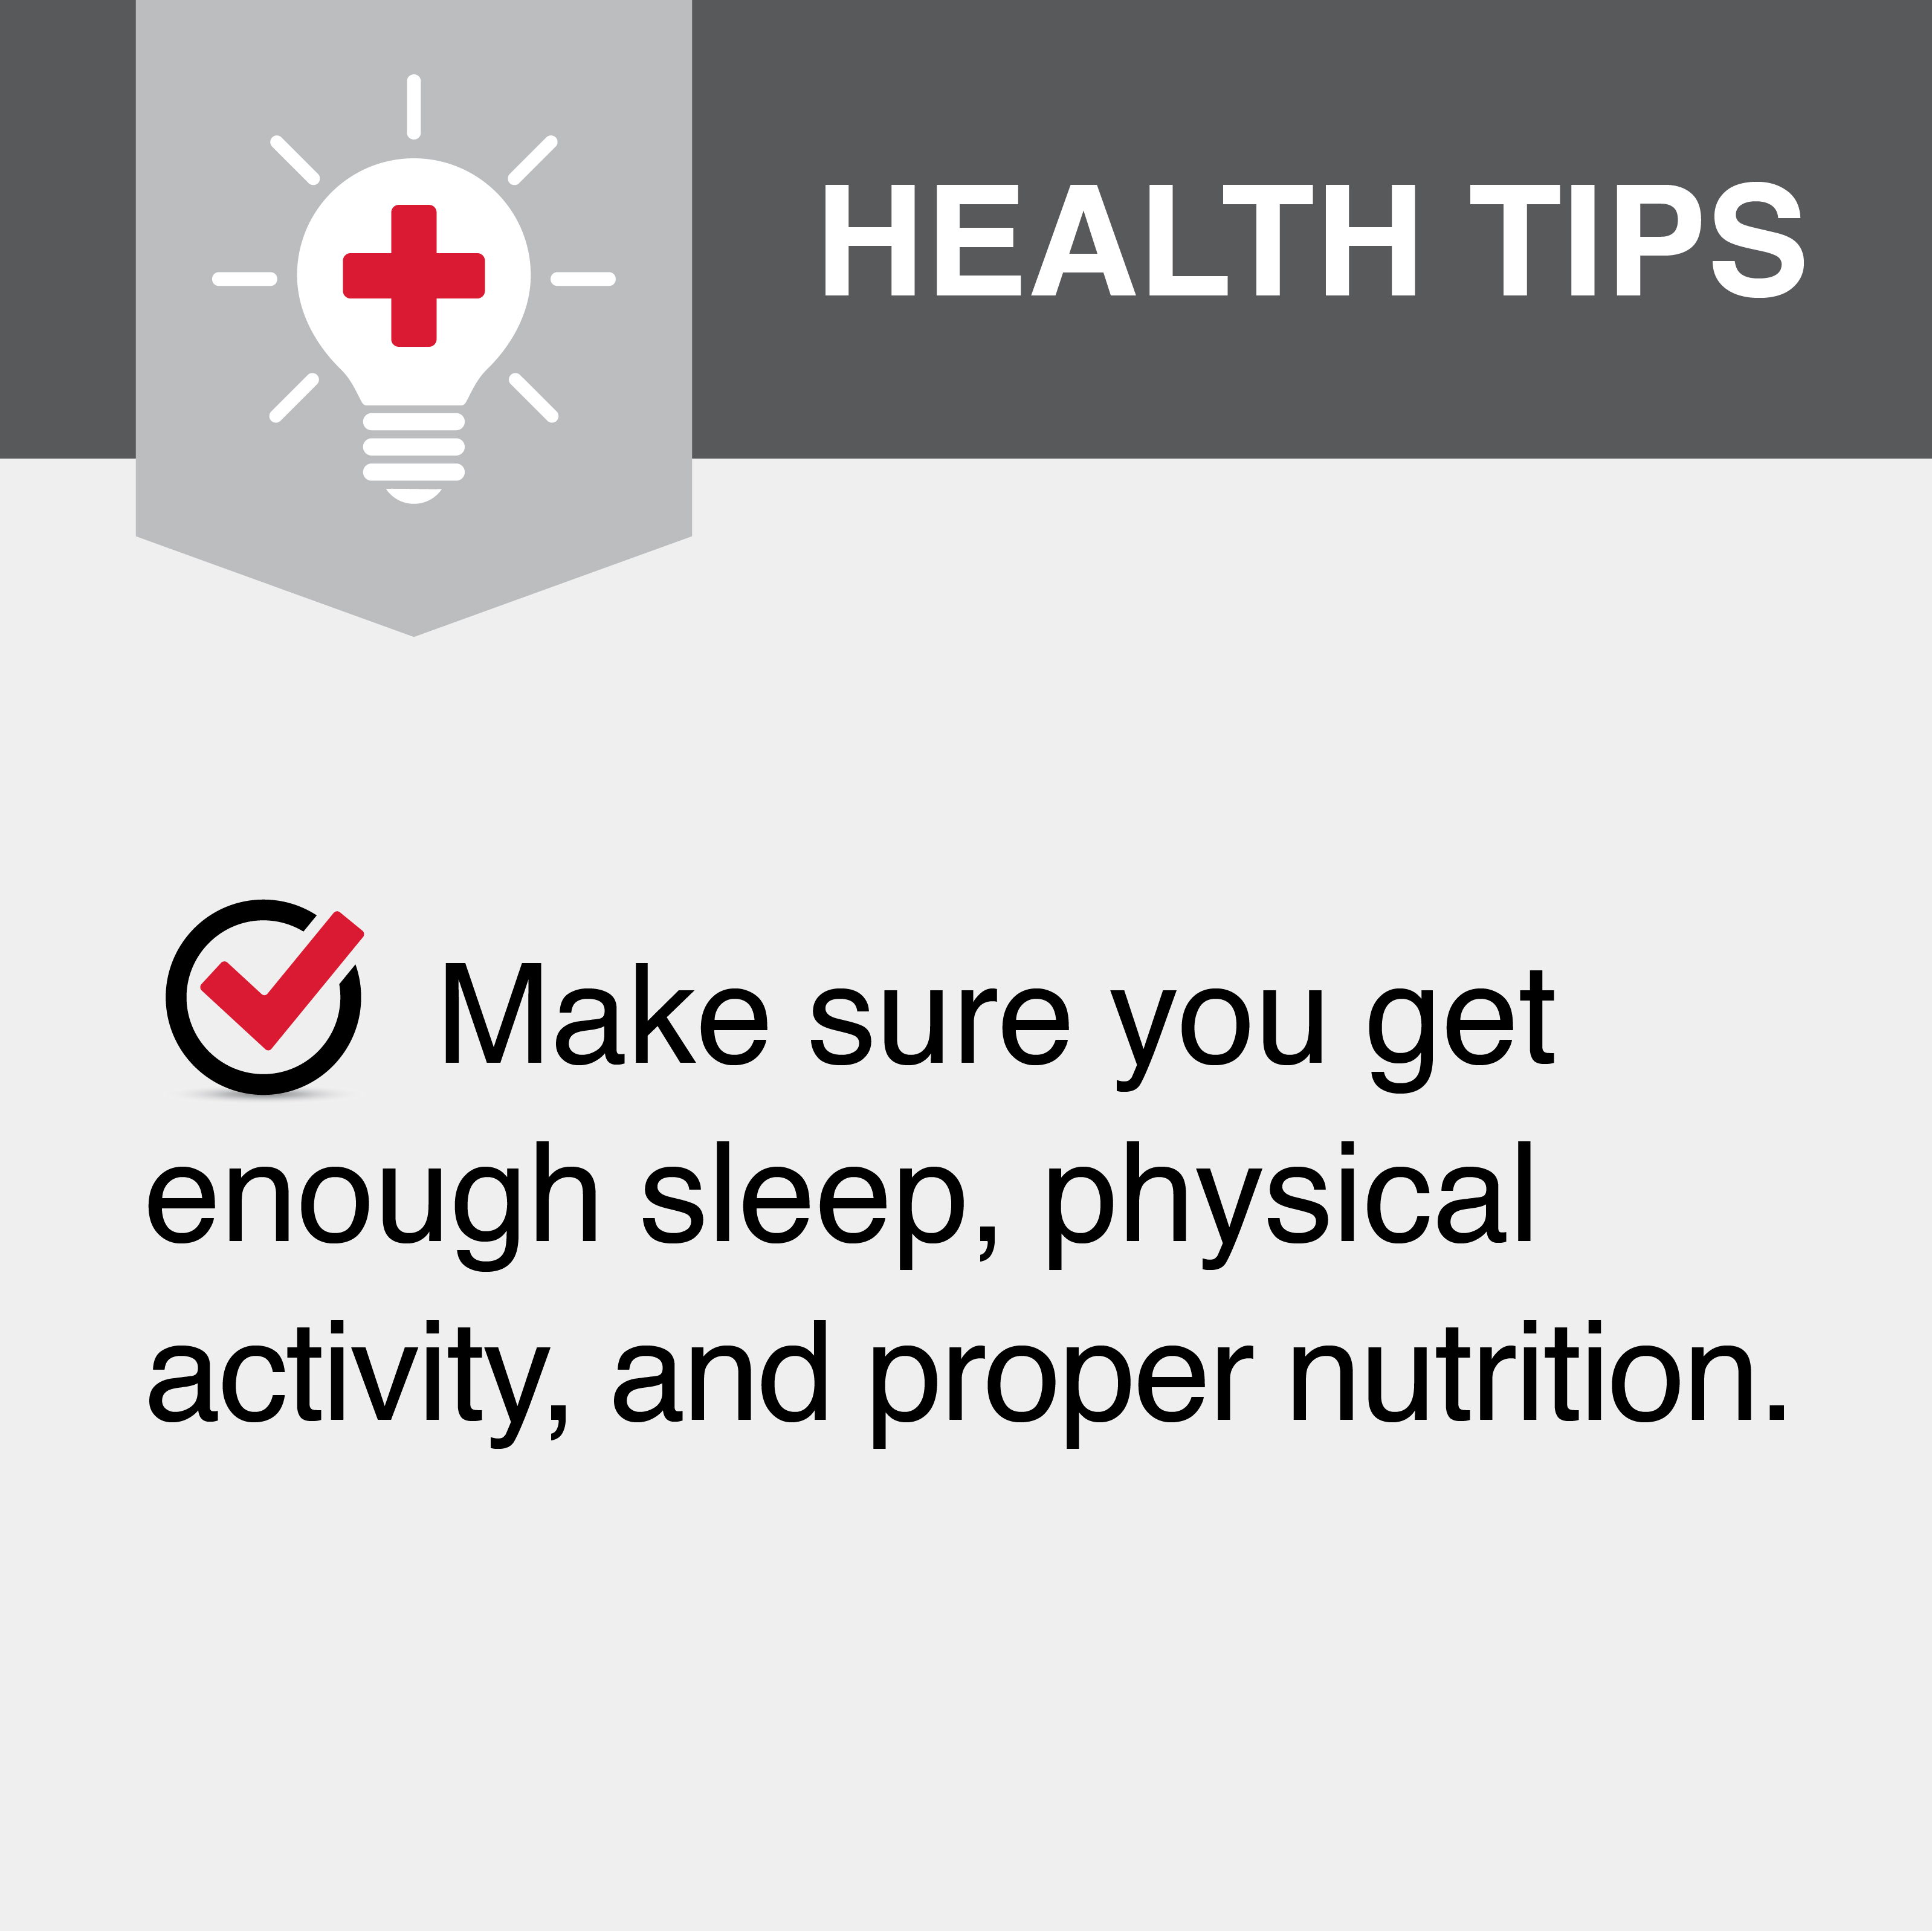 Make sure you get enough sleep, physical activity, and proper nutrition.